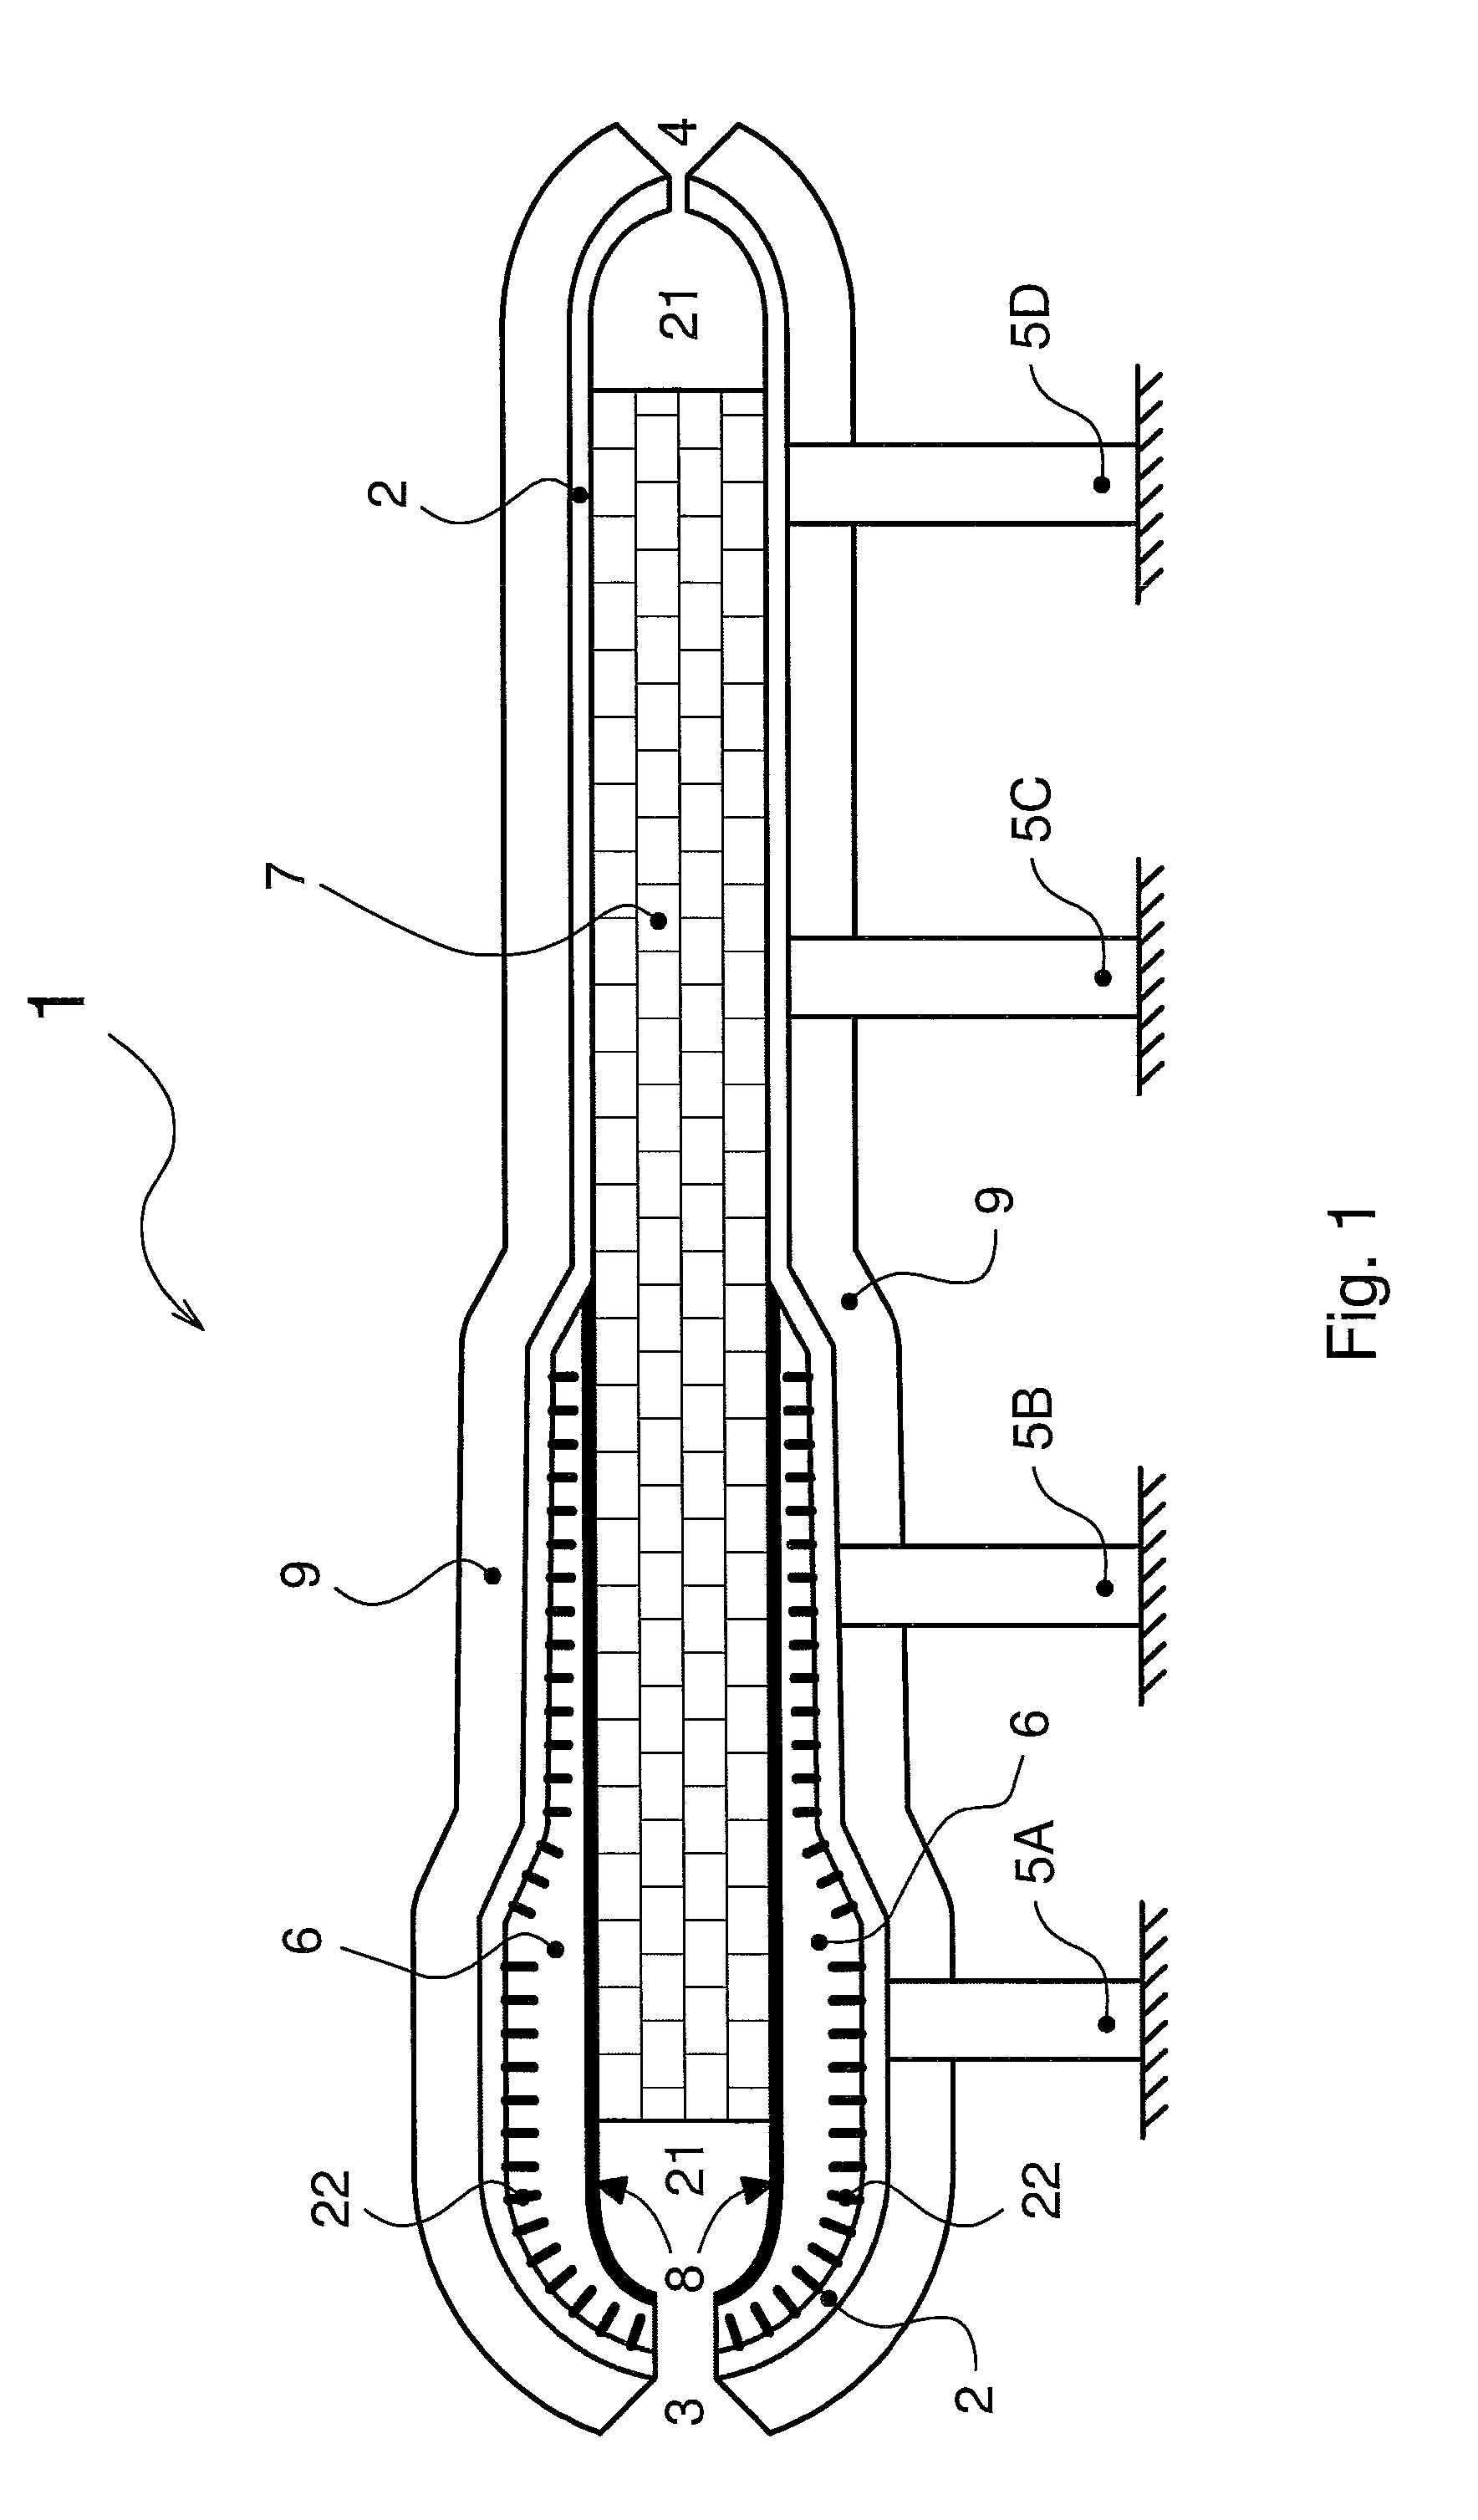 Vessel of a heat storage and release apparatus, heat storage and release assembly, and energy production plant